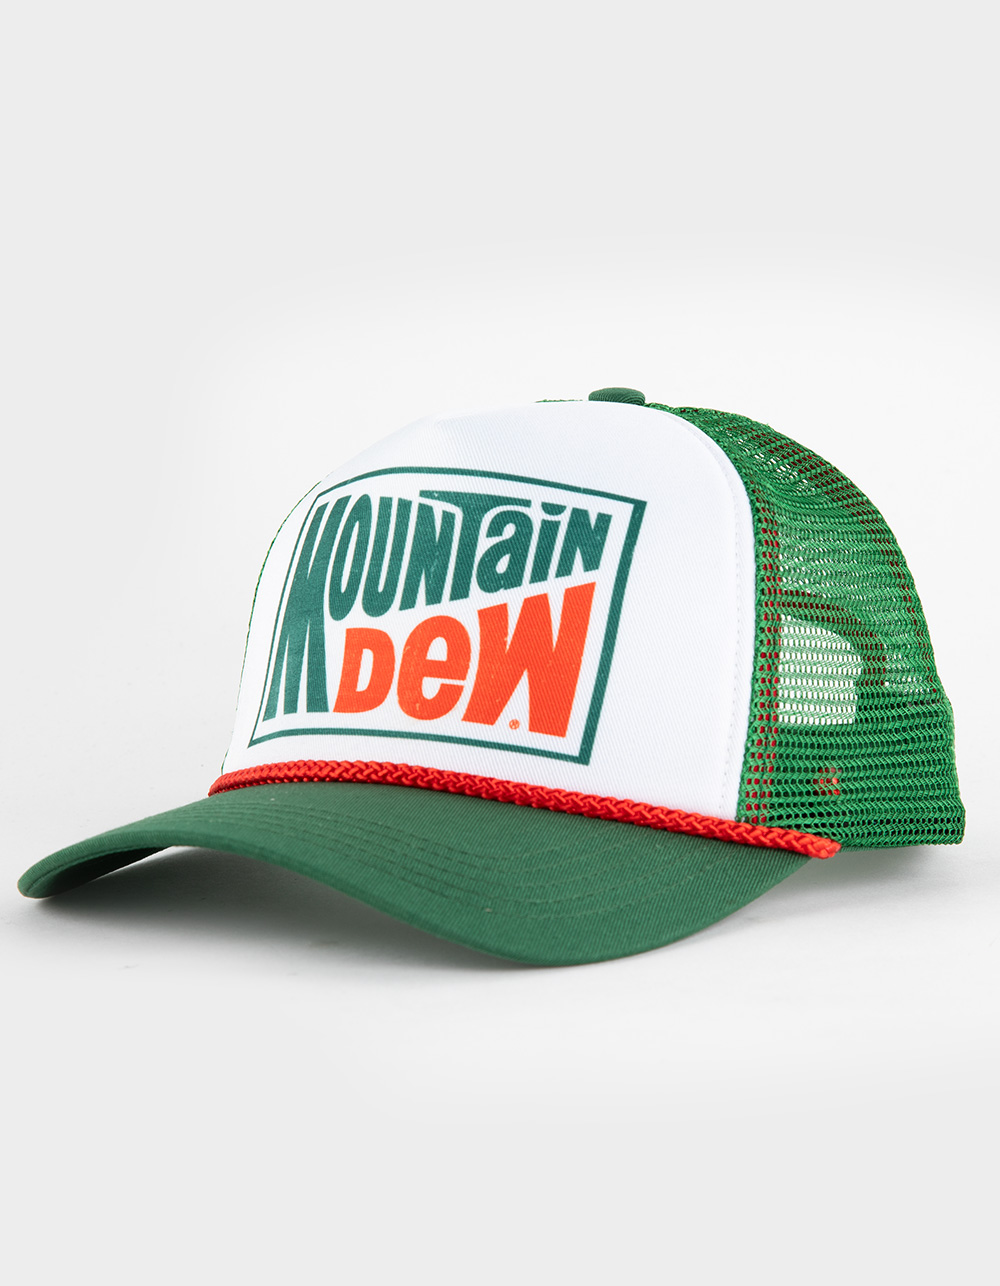 Mountain Dew Classic Colors Trucker Hat Green & White